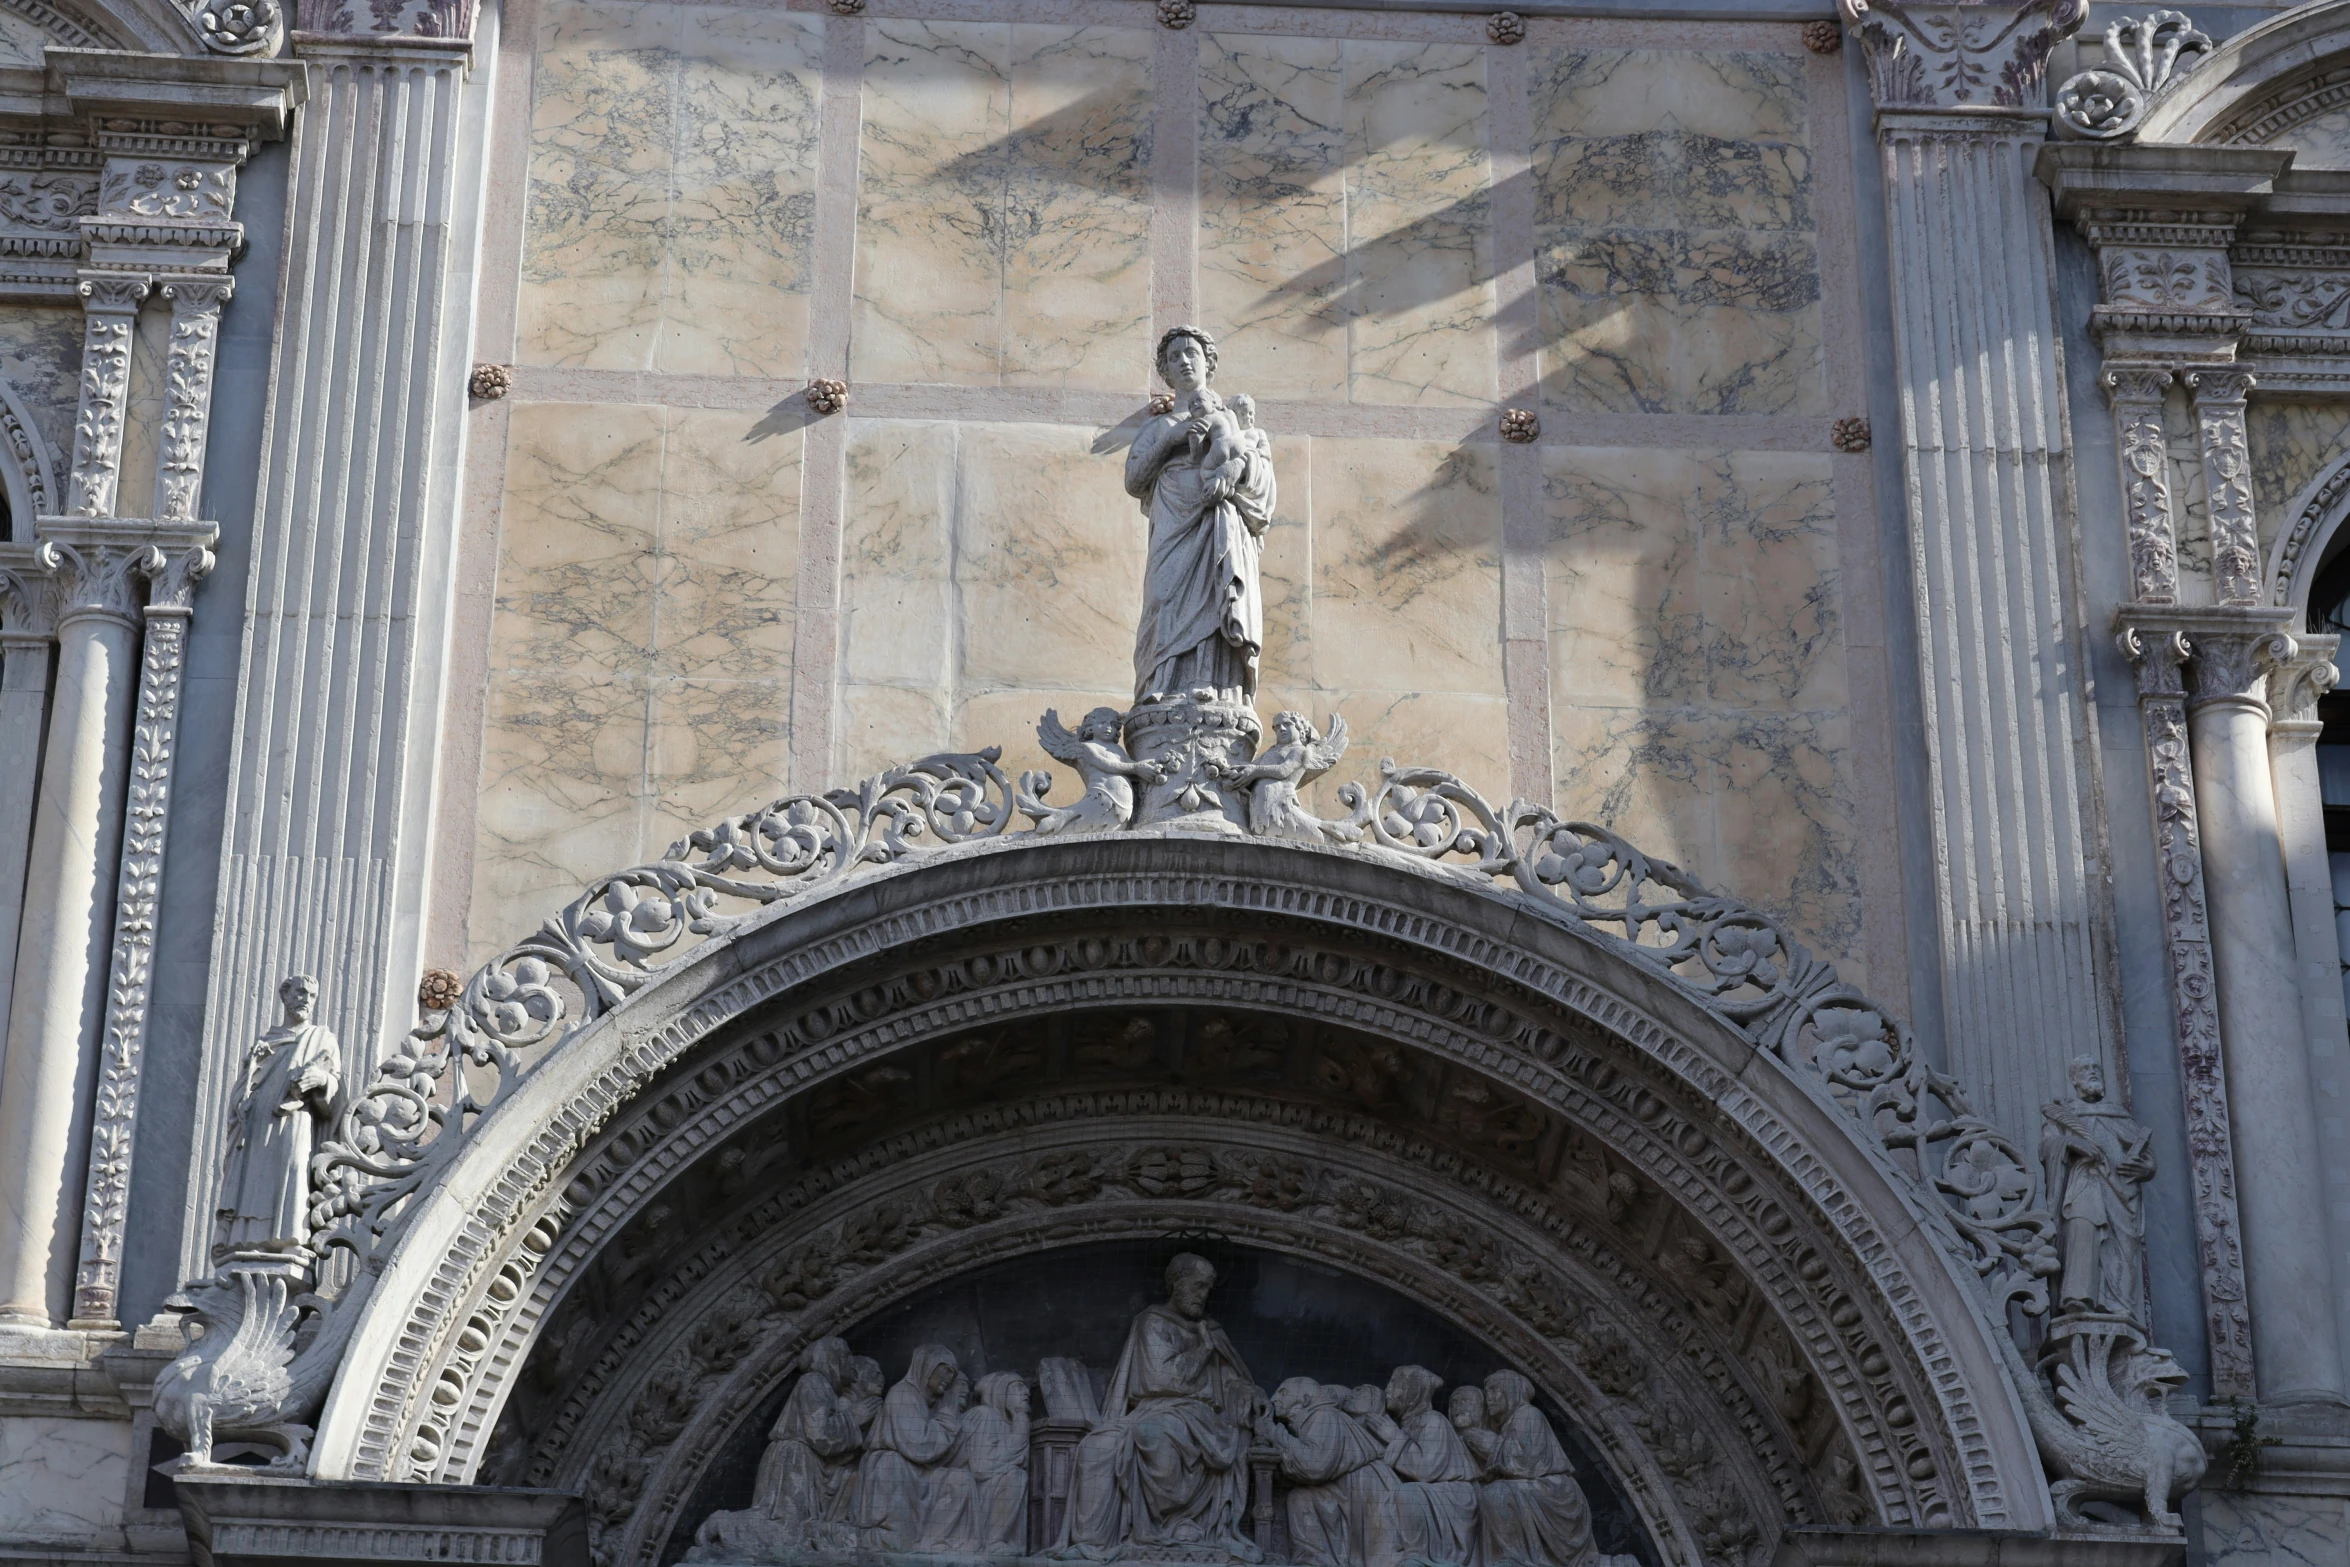 the stone facade of the building is decorated with statues